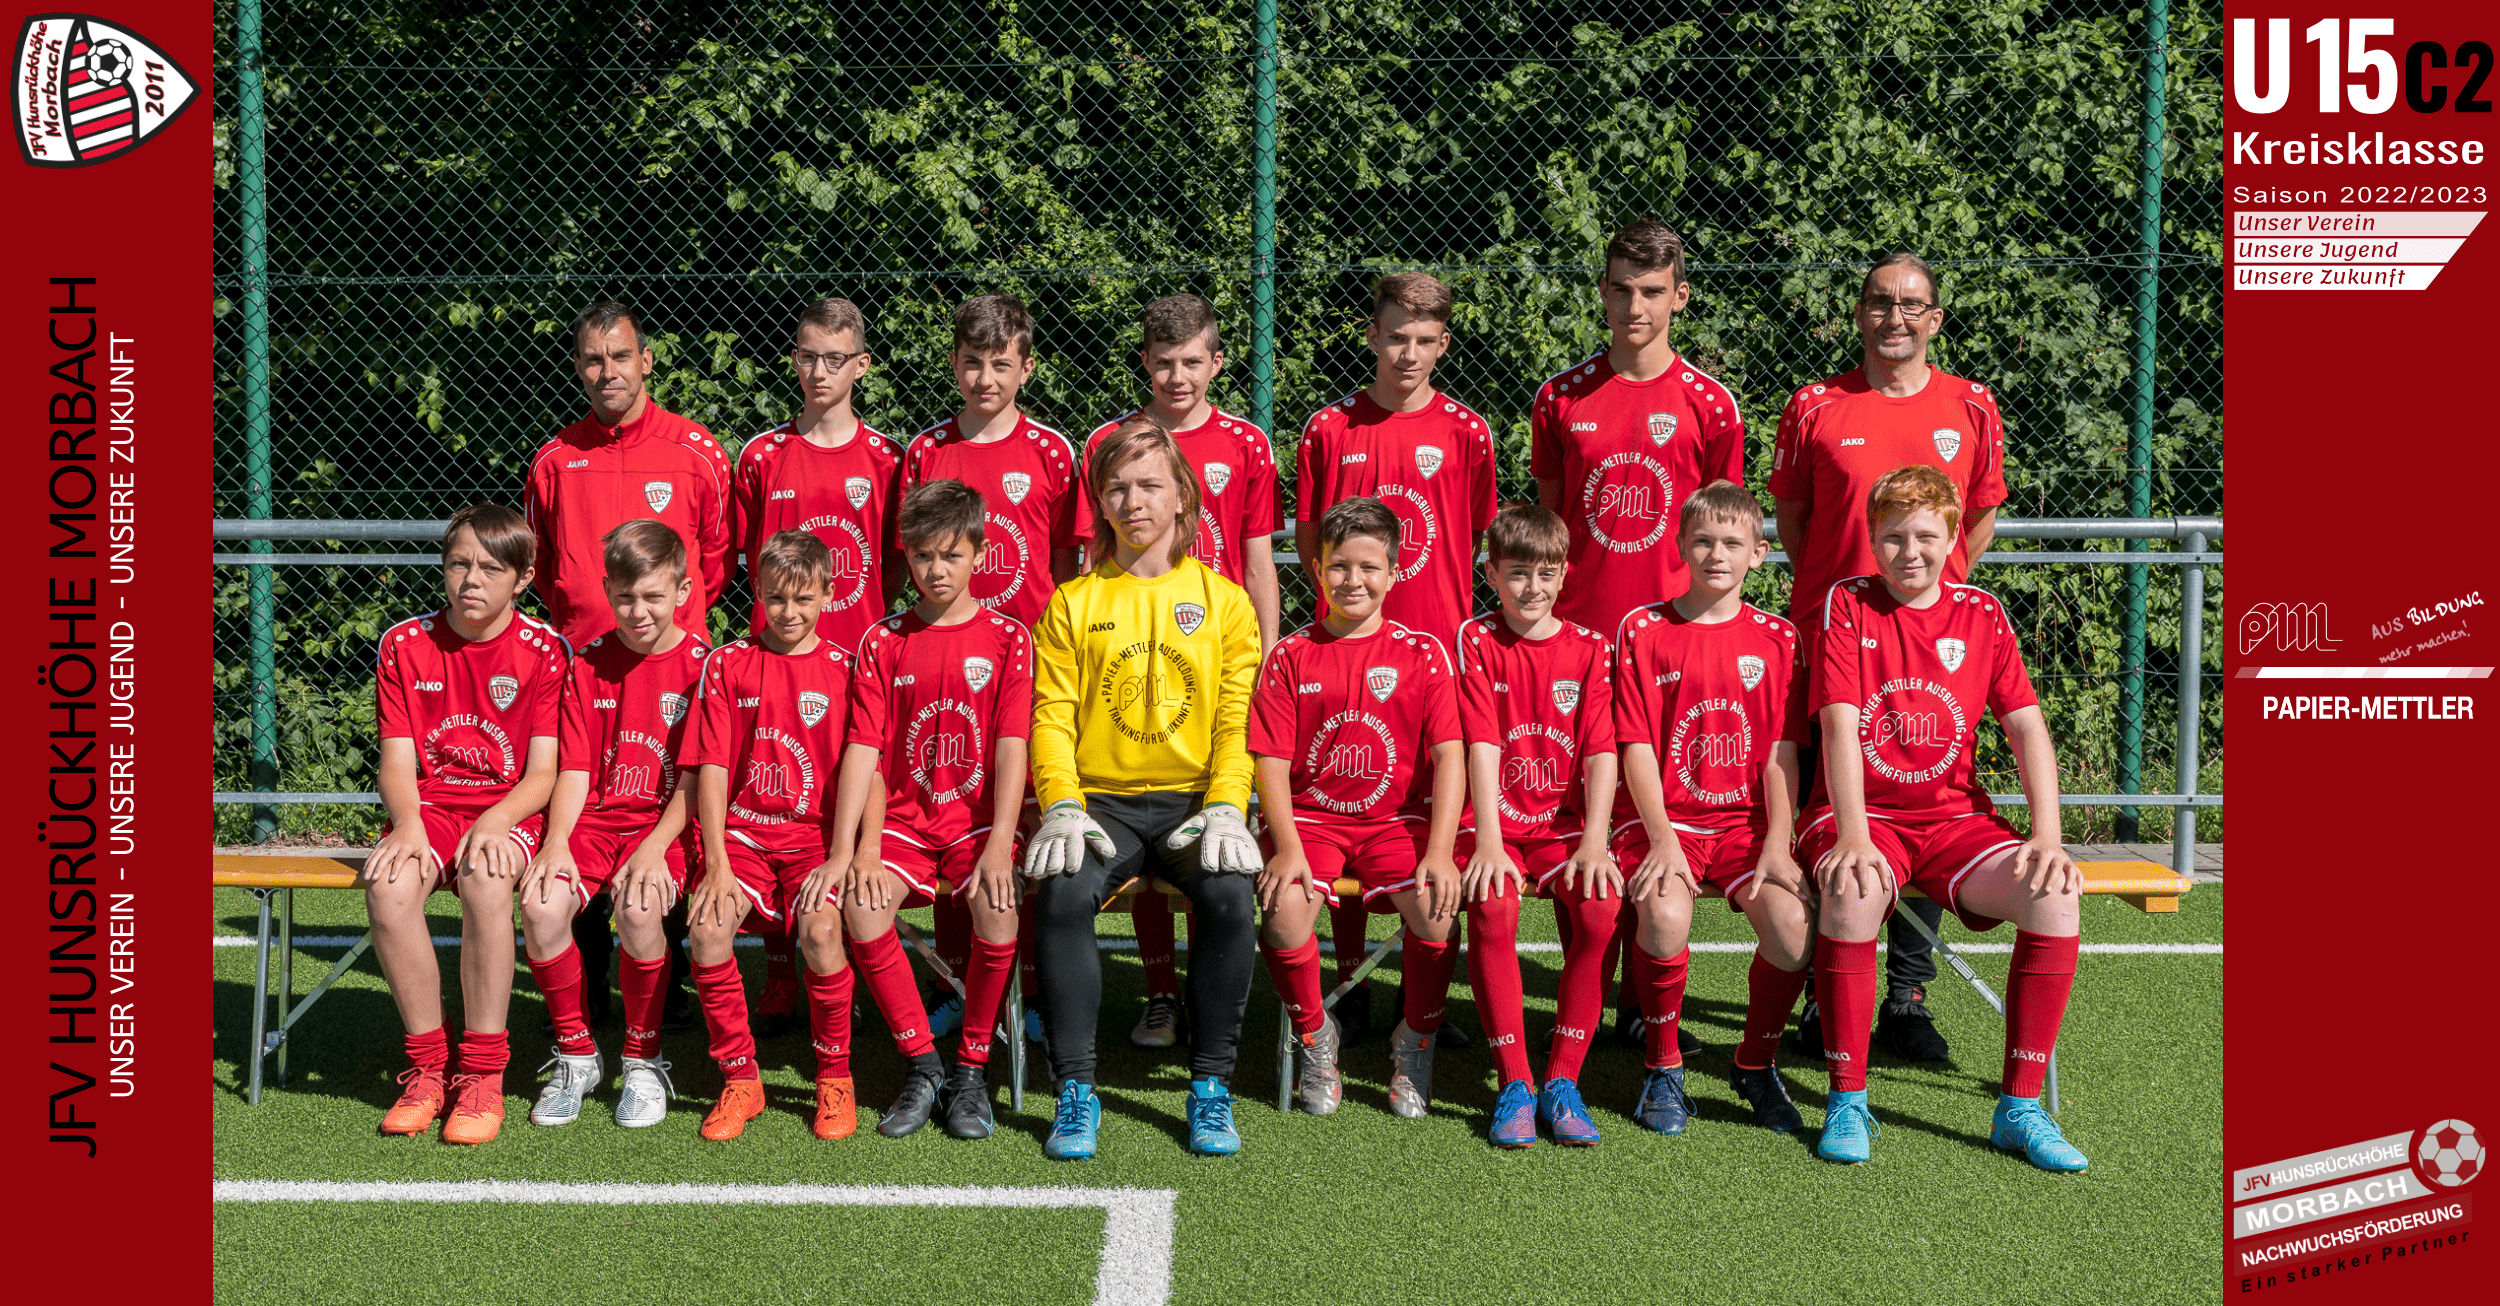 Read more about the article U15 C2: JSG Wengerohr – JFV HH Morbach II 1:10 (0:4)